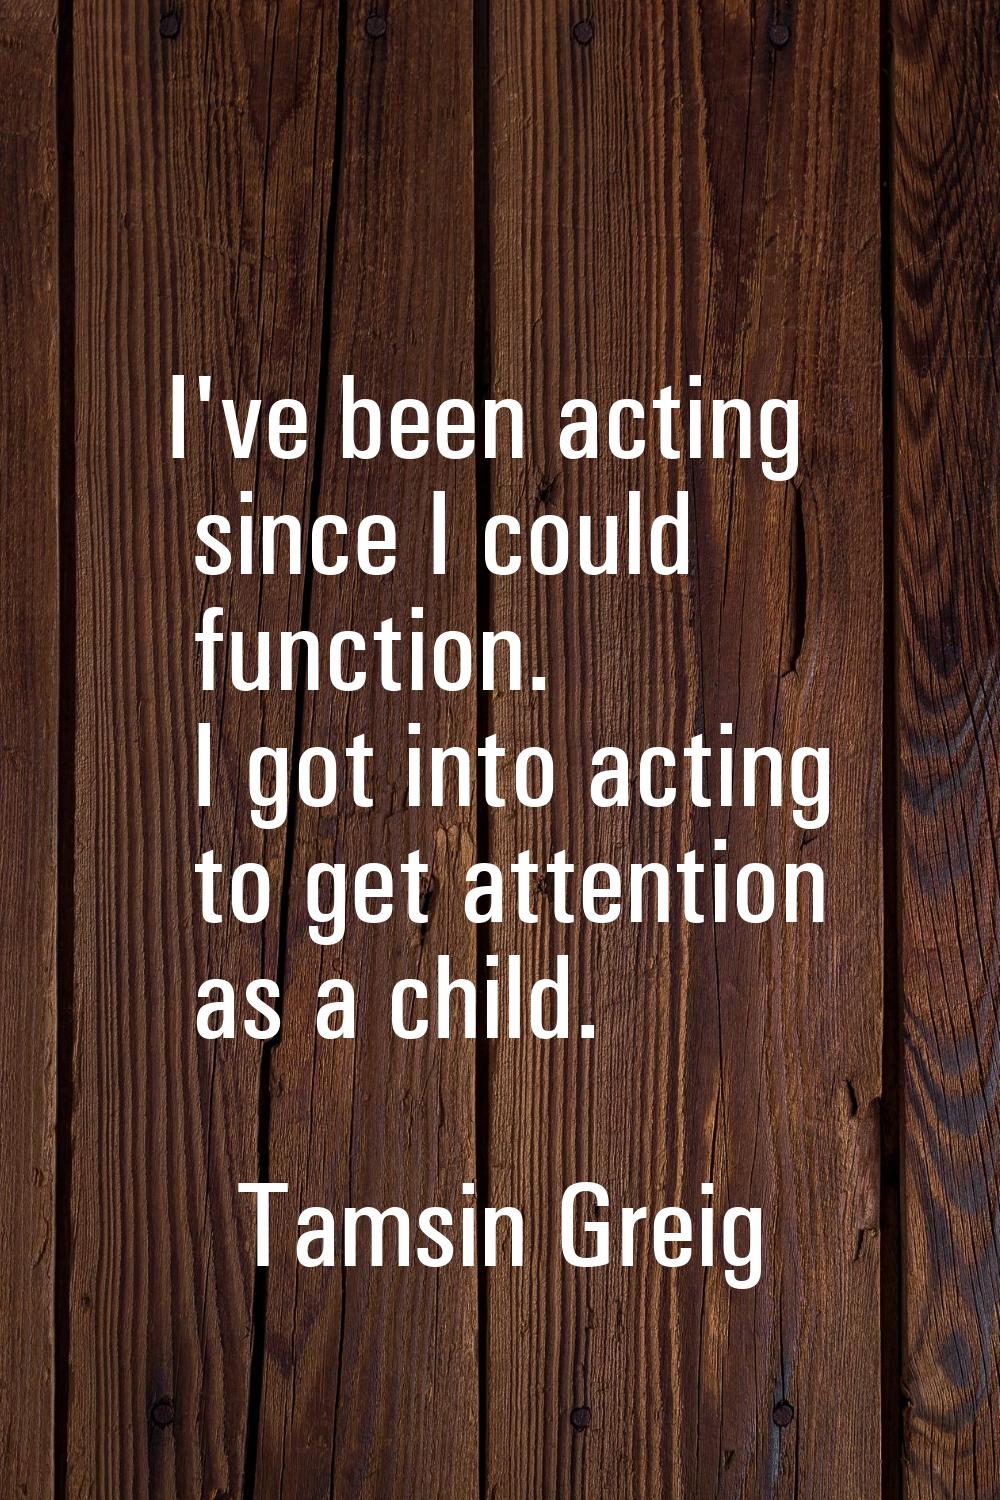 I've been acting since I could function. I got into acting to get attention as a child.